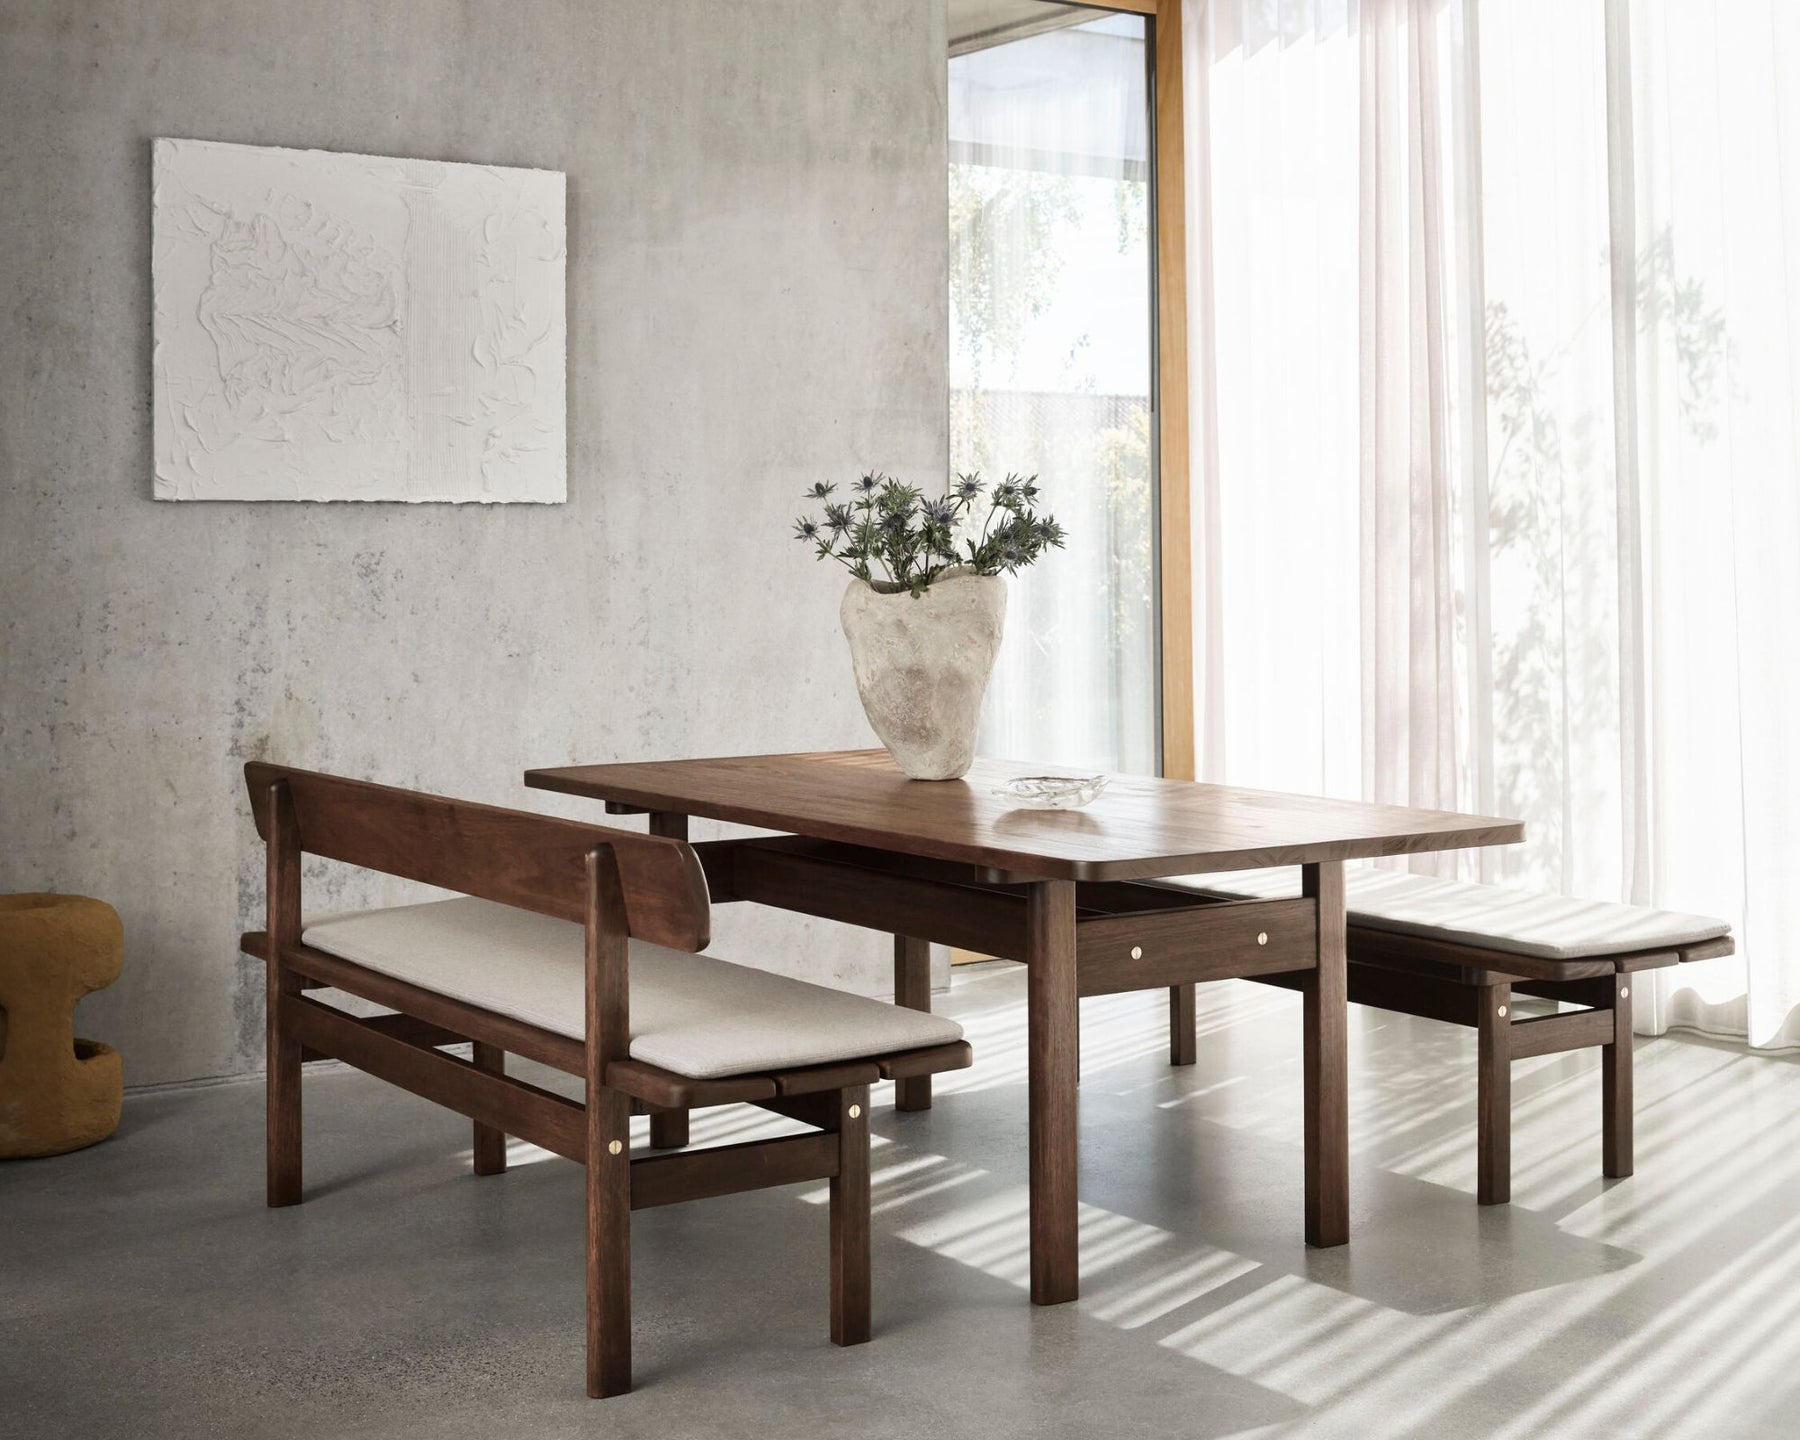 Kitchen Dining Table & Benches | DSHOP